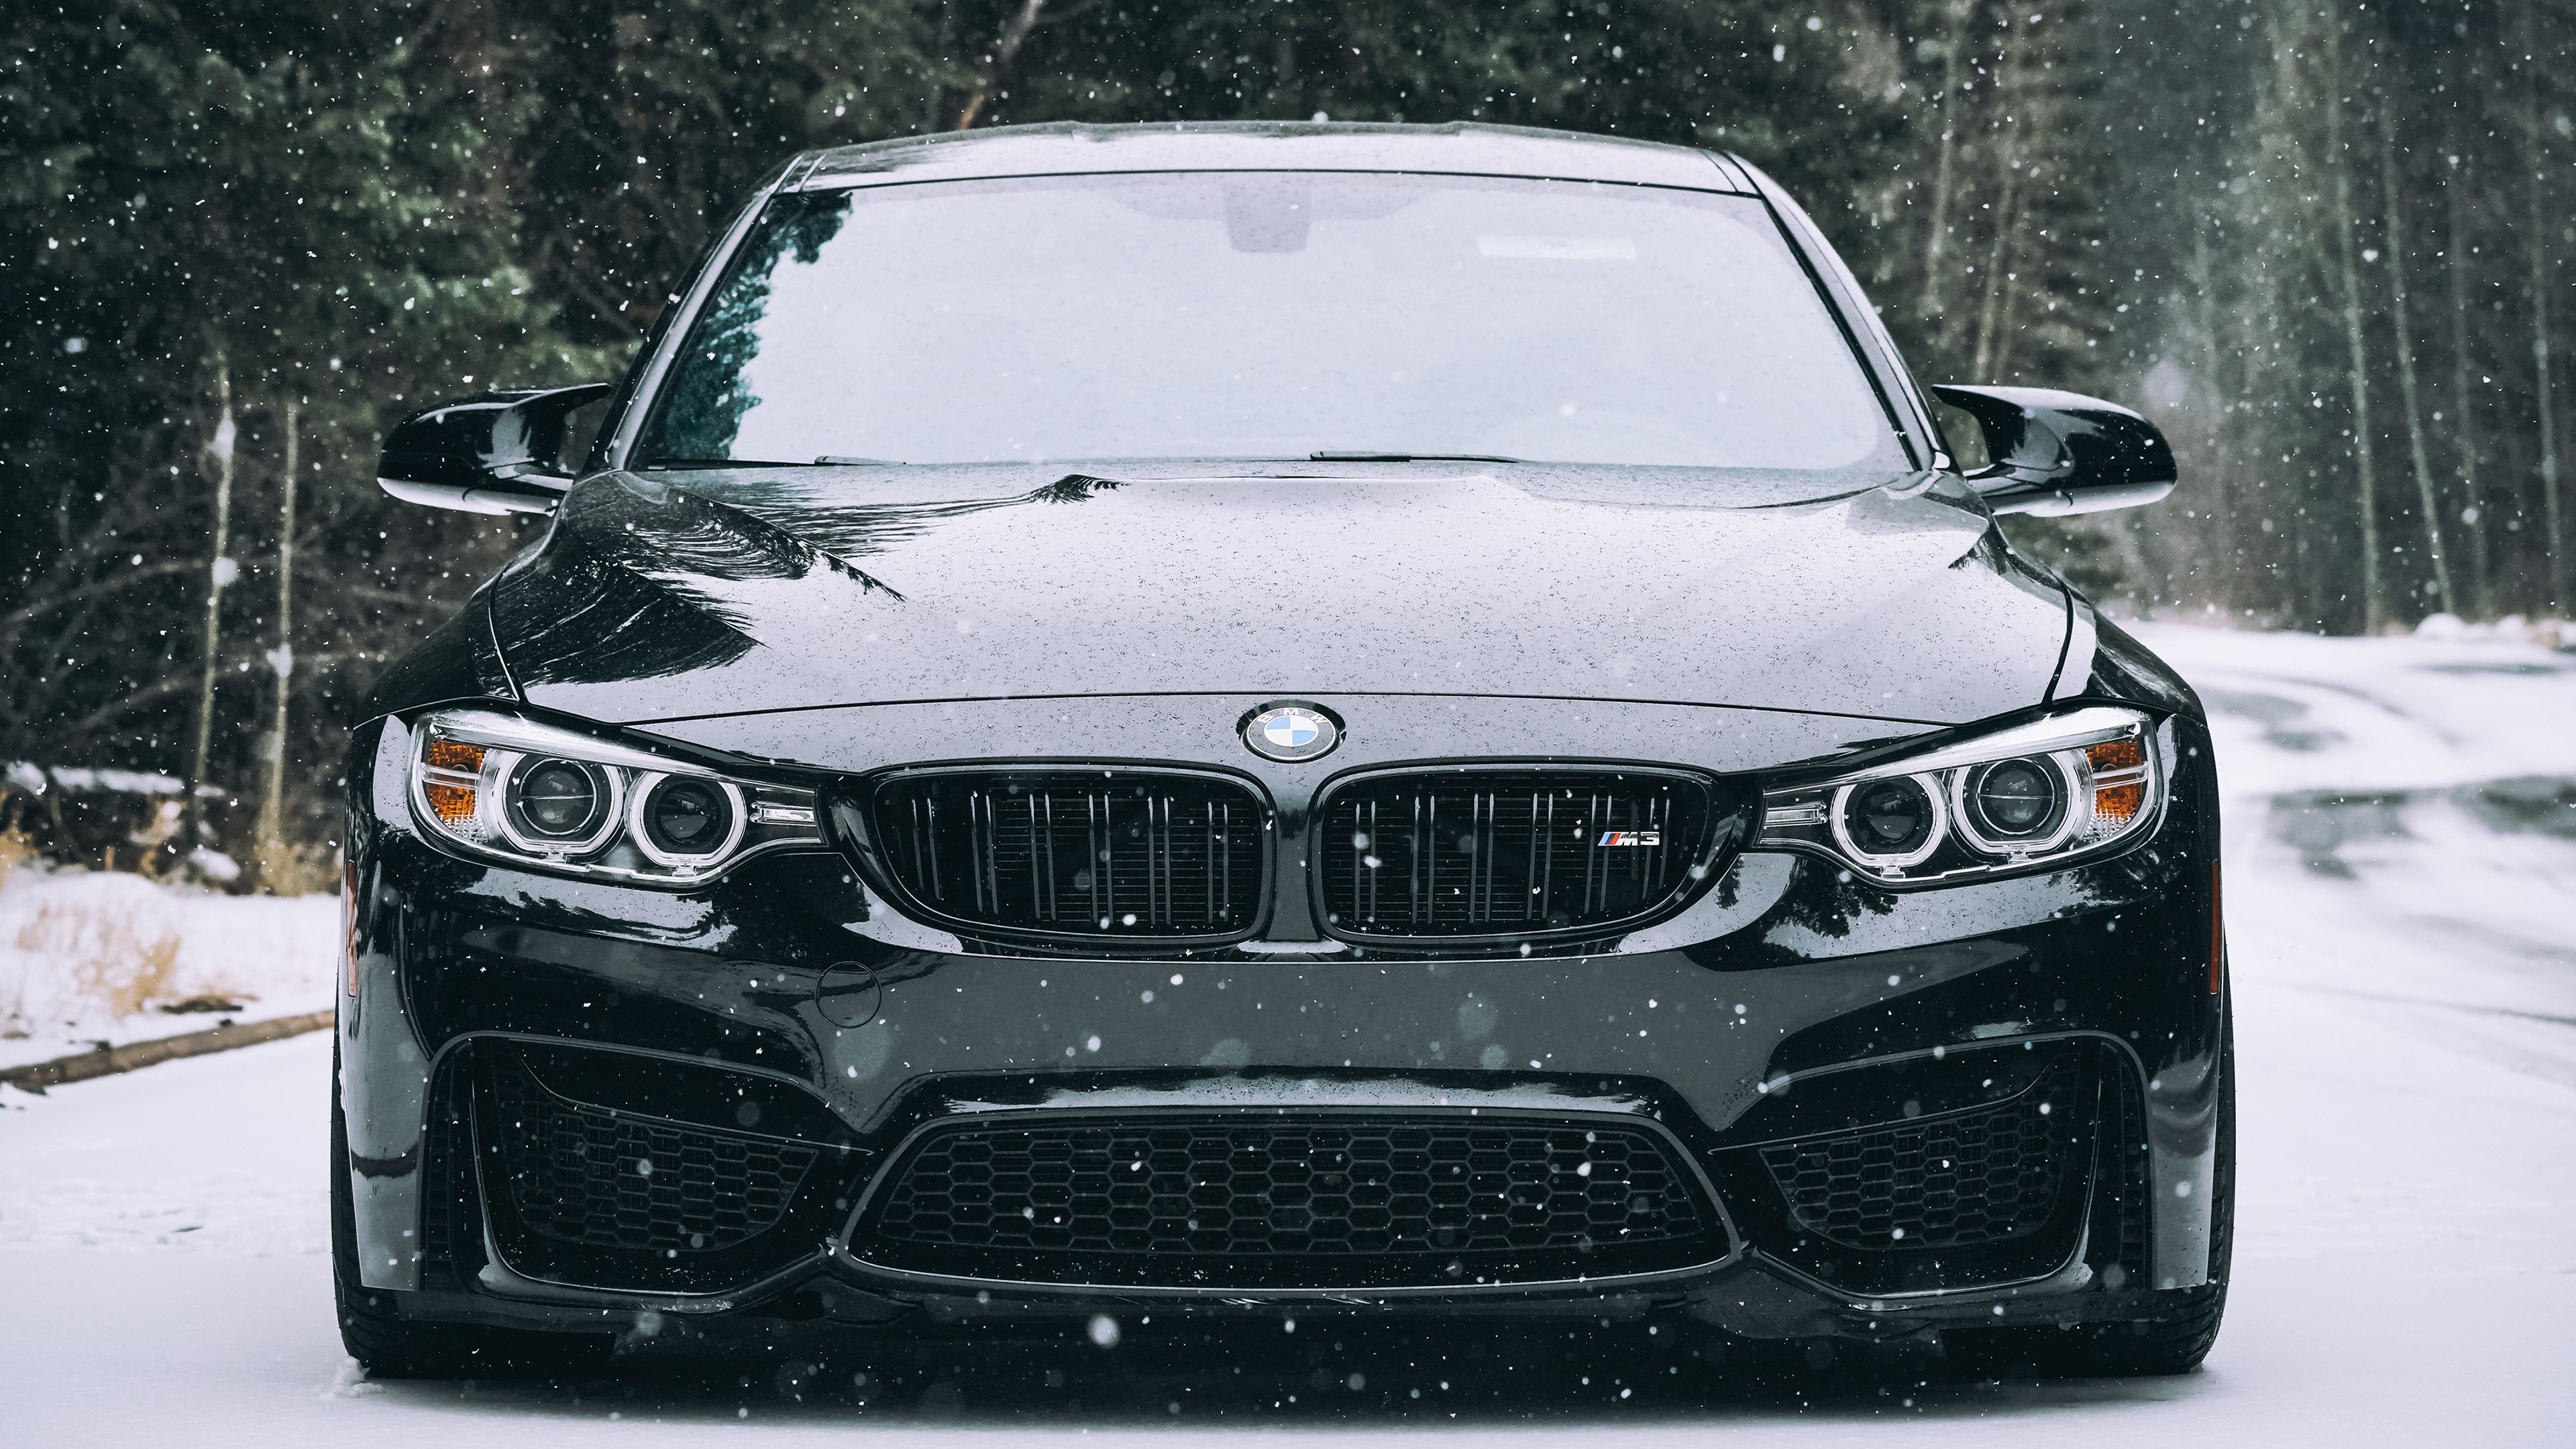 Wallpaper. Cars. photo. picture. bmw, F winter, snow, front view